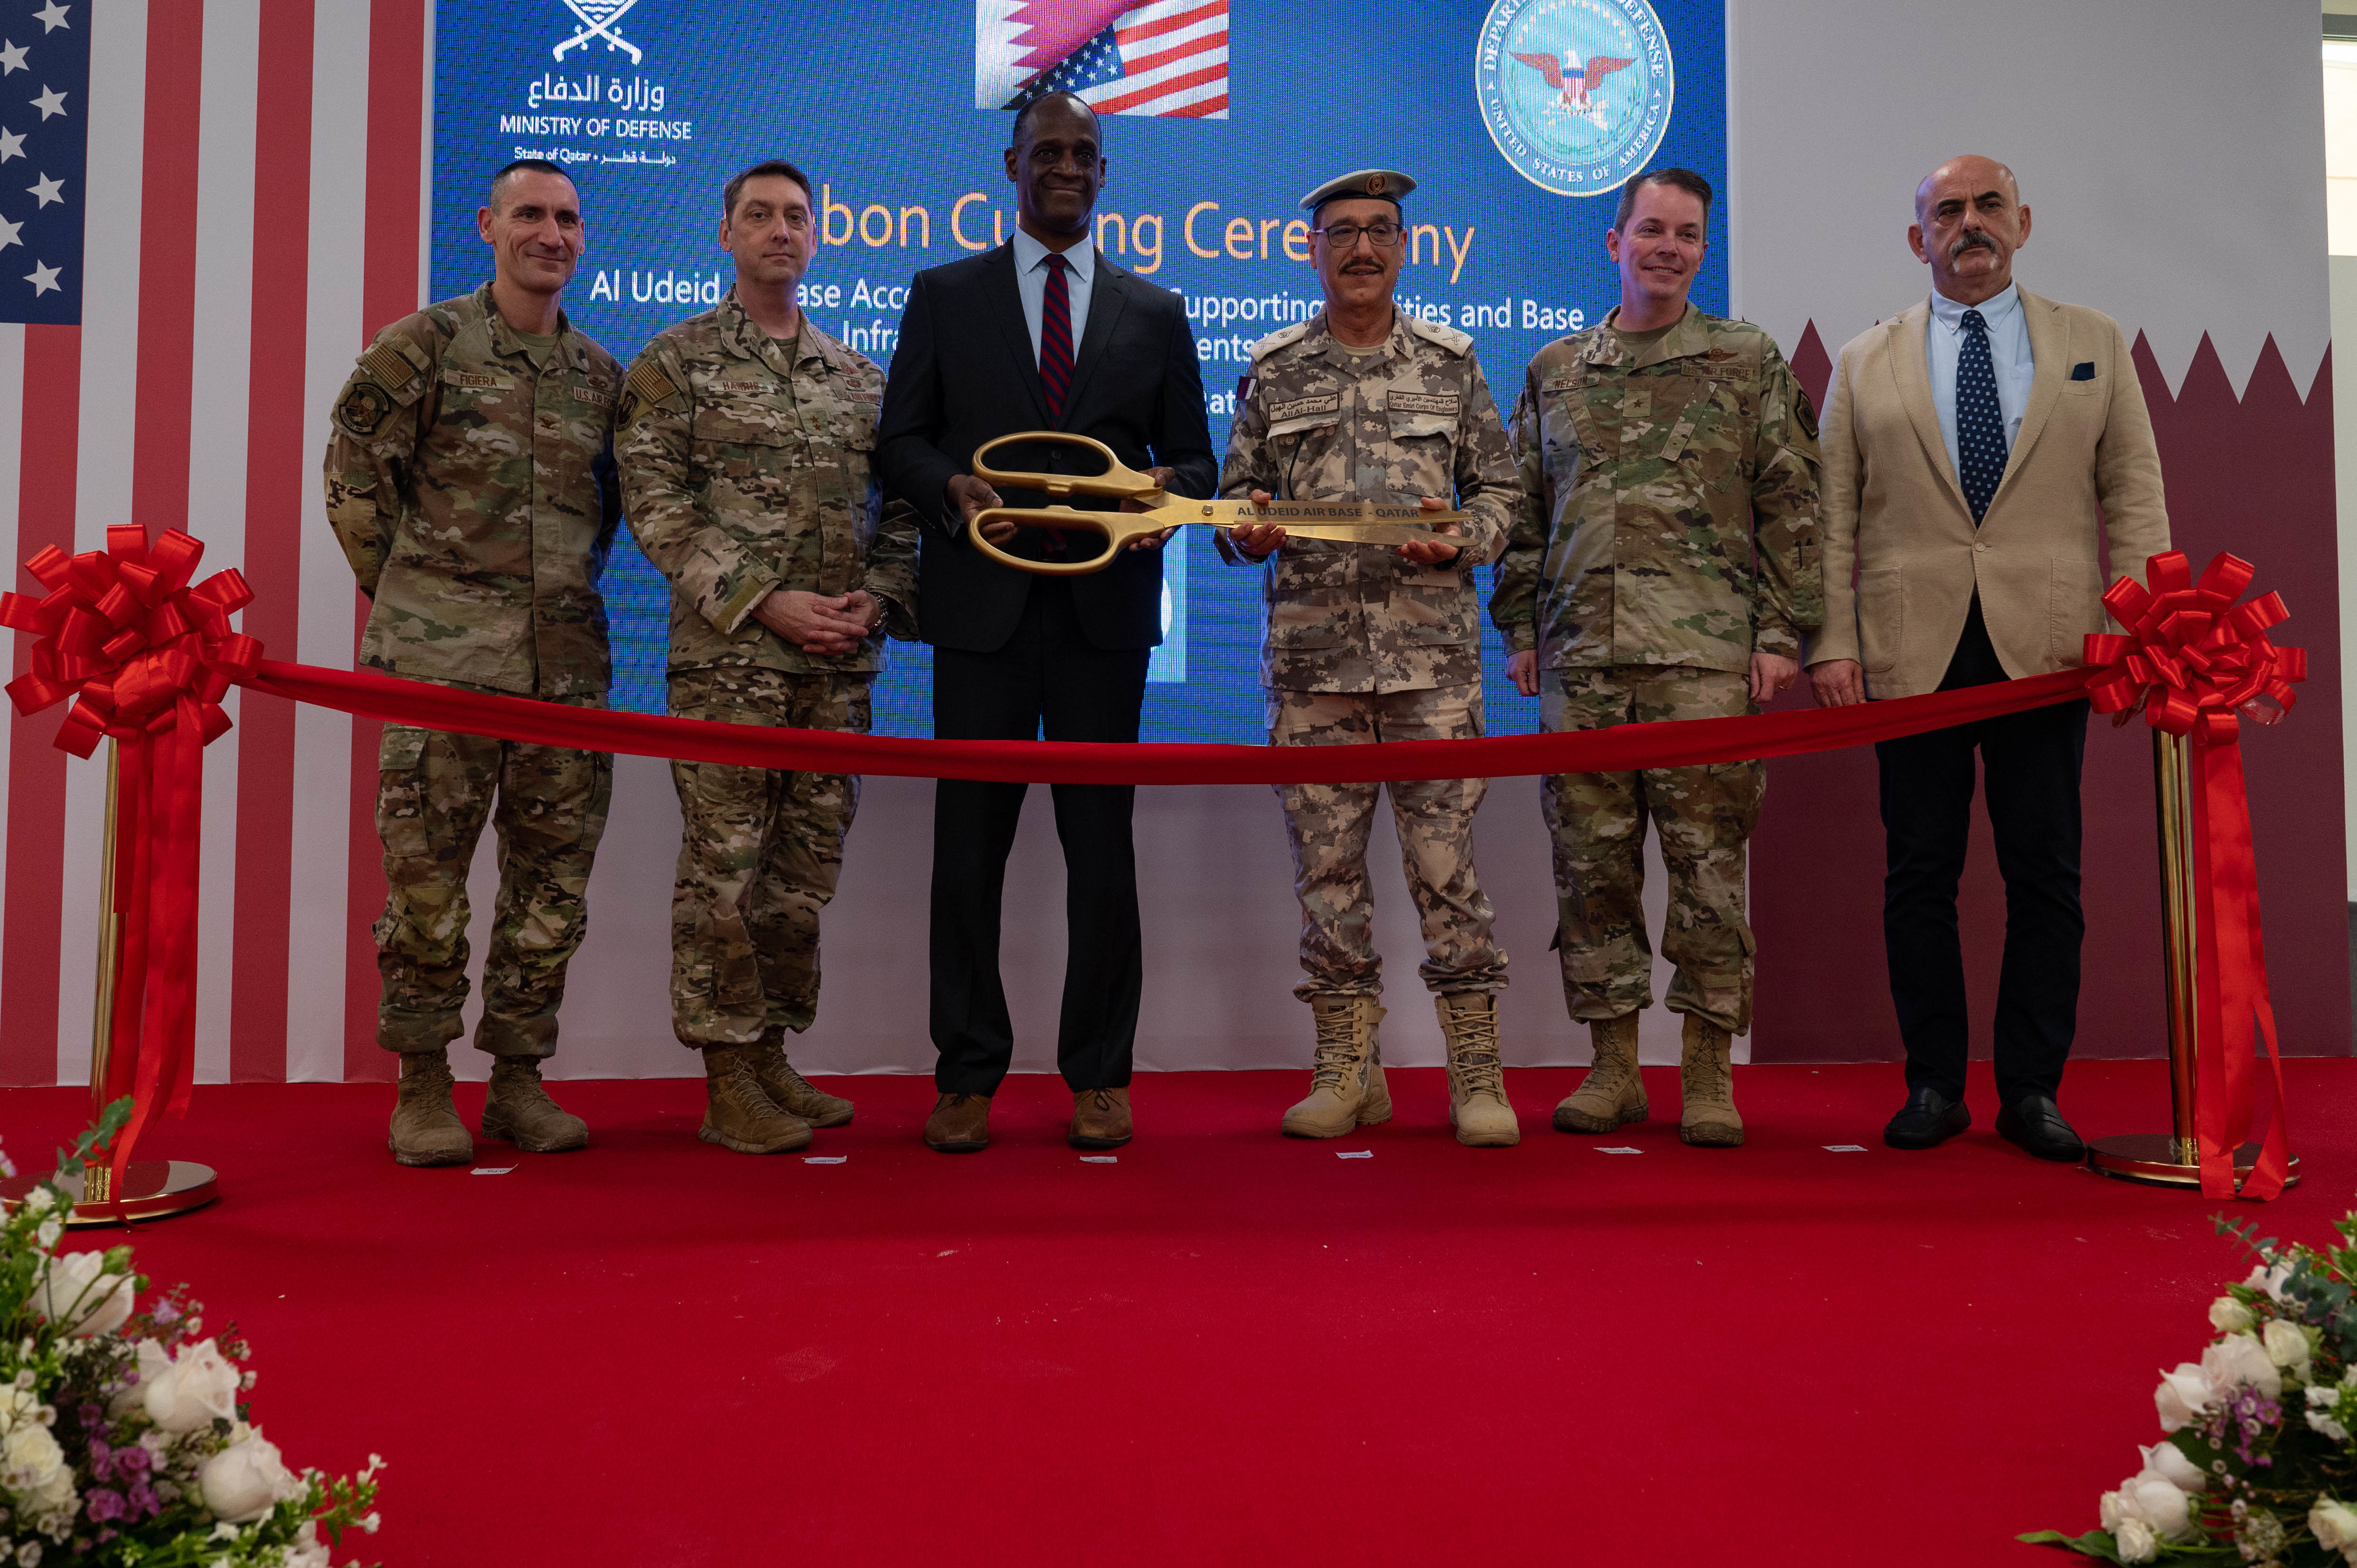 (From left) Col. Anthony Figiera, director of the Air Force Central Command Program Management Office, Maj. Gen. David Harris, Ninth Air Force (Air Forces Central) deputy commander and Combined Forces Air Component Commander, U.S. Central Command, Southwest Asia deputy, Ambassador Timmy Davis, Ambassador of the United States to the State of Qatar, Maj. Gen. Essa Al-Kubasisi, commander of the Qatar Emiri Corps of Engineers, Brig. Gen. Jeffrey Nelson, 379th Air Expeditionary Wing commander, and Mr. Mahmet Gongor, project director for Bahadir Construction pose for a photo during the Qatar Development of Al Udeid Phase 1 ceremony, at Al Udeid Air Base, Qatar, Jan. 26, 2023. Phase 1 of the QDA focused on the construction of 38 new facilities such as new dormitories and dining facilities, enhancing the quality of life for Airmen, Soldiers, Sailors, Marines, Guardians and coalition partners. (U.S. Air Force photo by Staff Sgt. Derek Seifert)